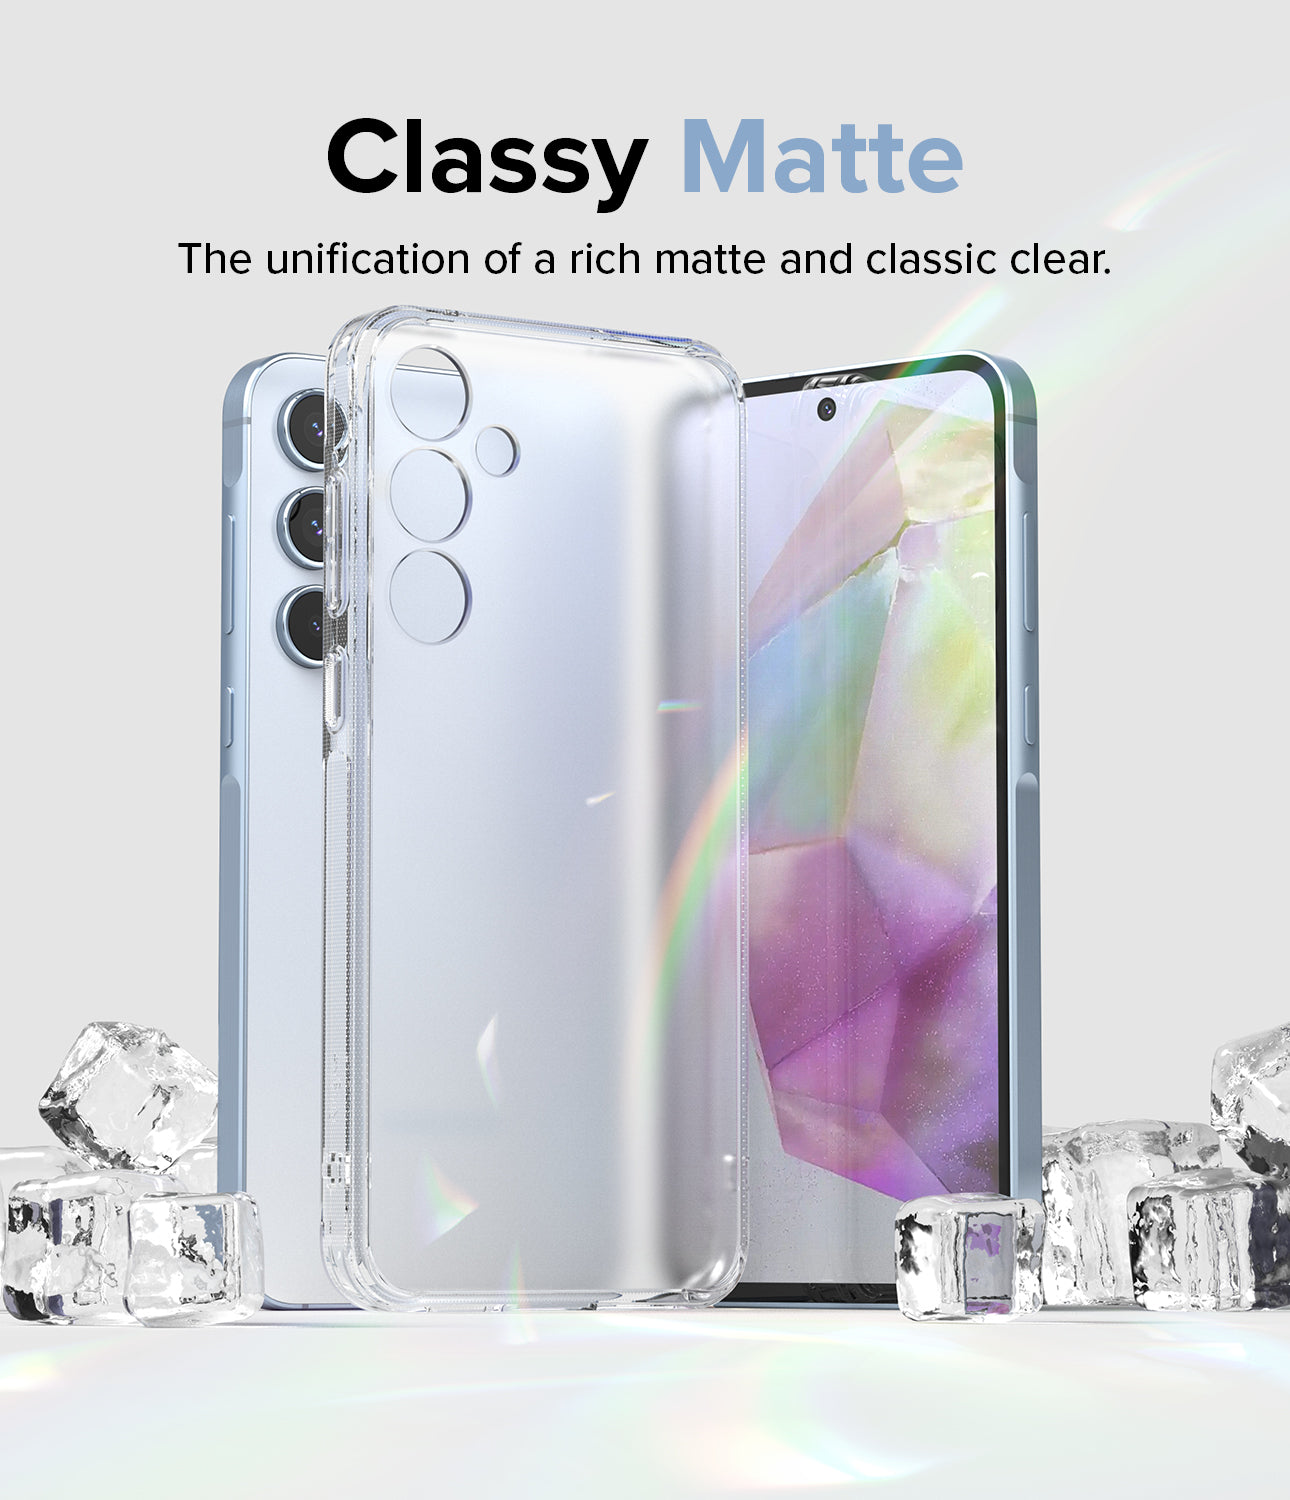 Galaxy A35 Case | Fusion Matte - Classy Matte. The unification of a rich matte and classic clear.